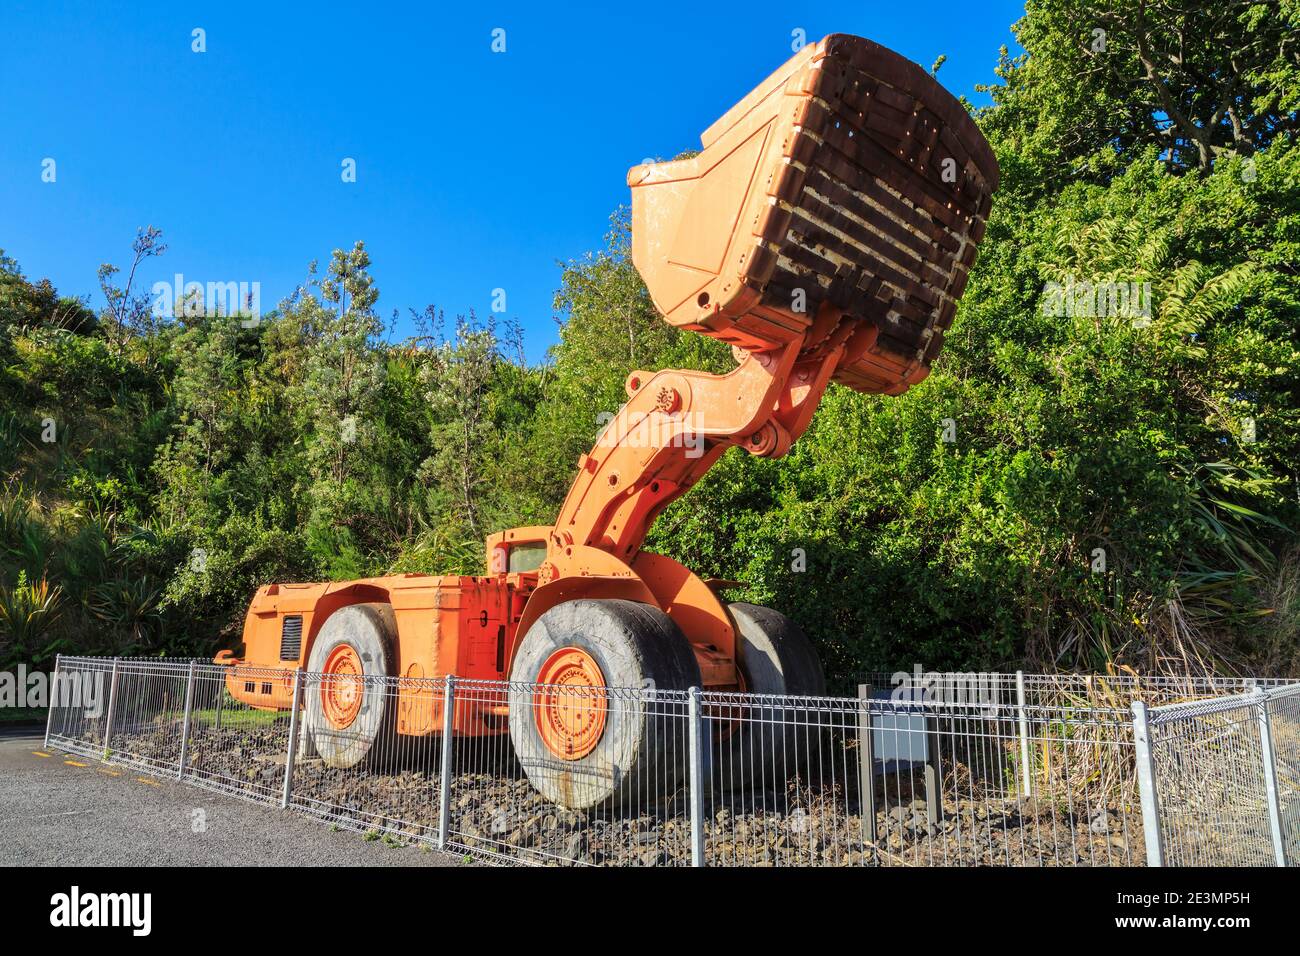 A giant "bogger" (front-end loading earth moving machine) on display in Waihi, New Zealand Stock Photo